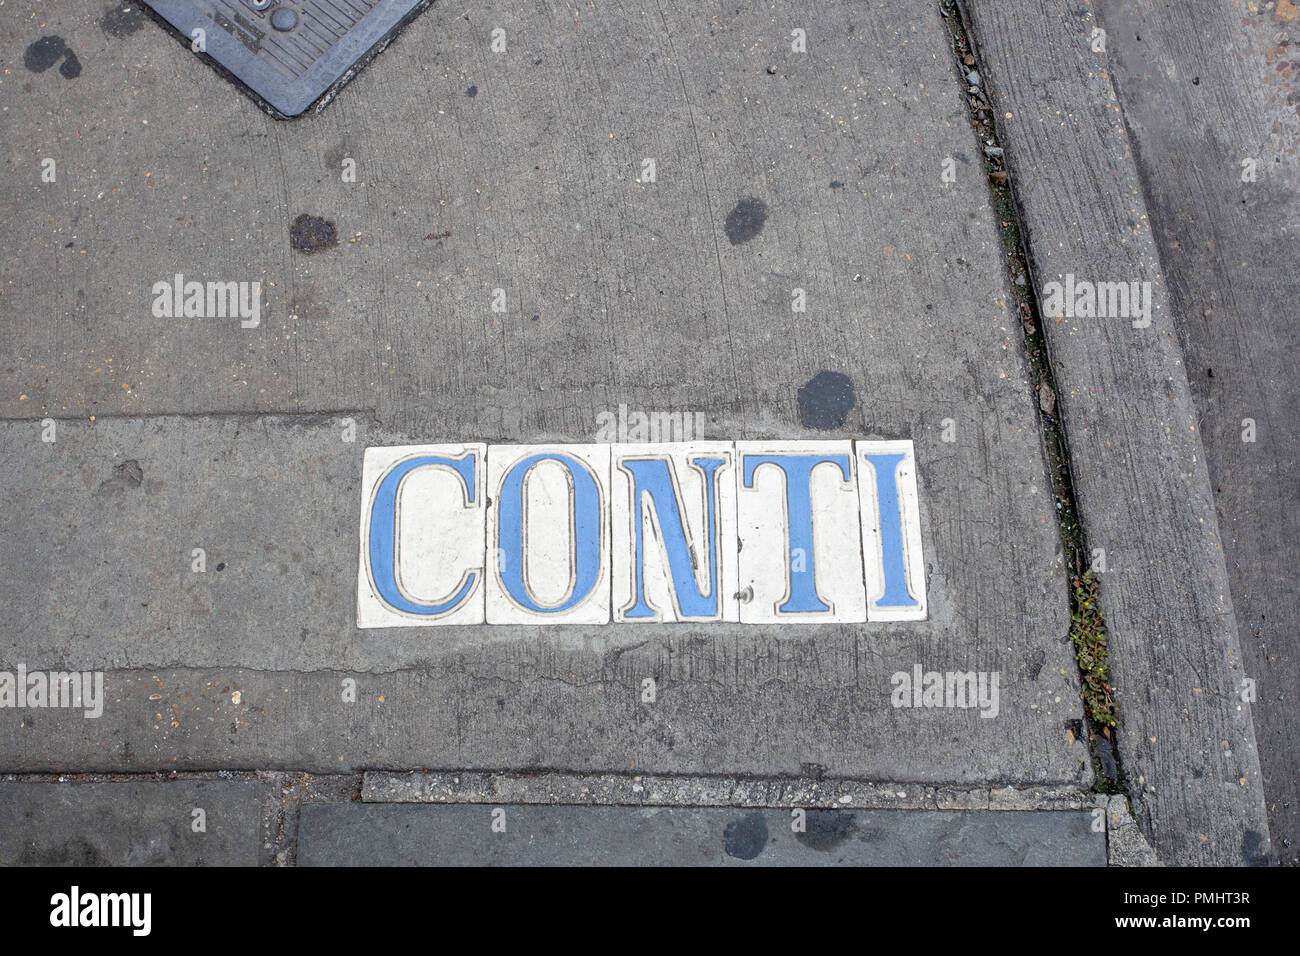 Conti Street New Orleans Stock Photo